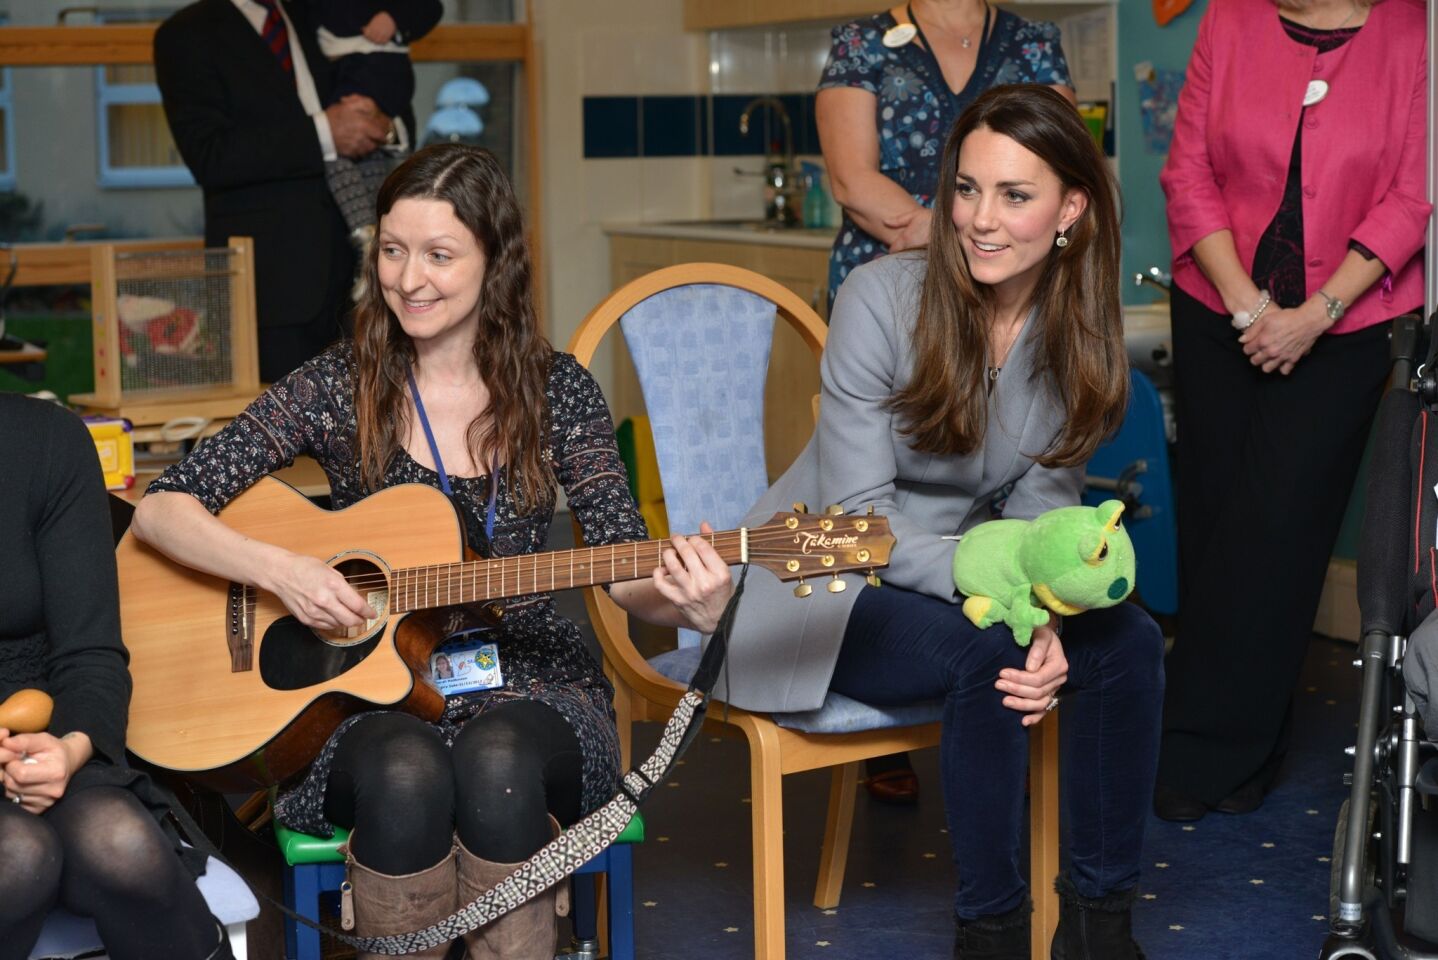 Catherine, Duchess of Cambridge, visits the Shooting Star House Children's hospice where she toured facilities, viewed a music session and met with volunteers on Dec. 6, 2013, in Hampton, England.